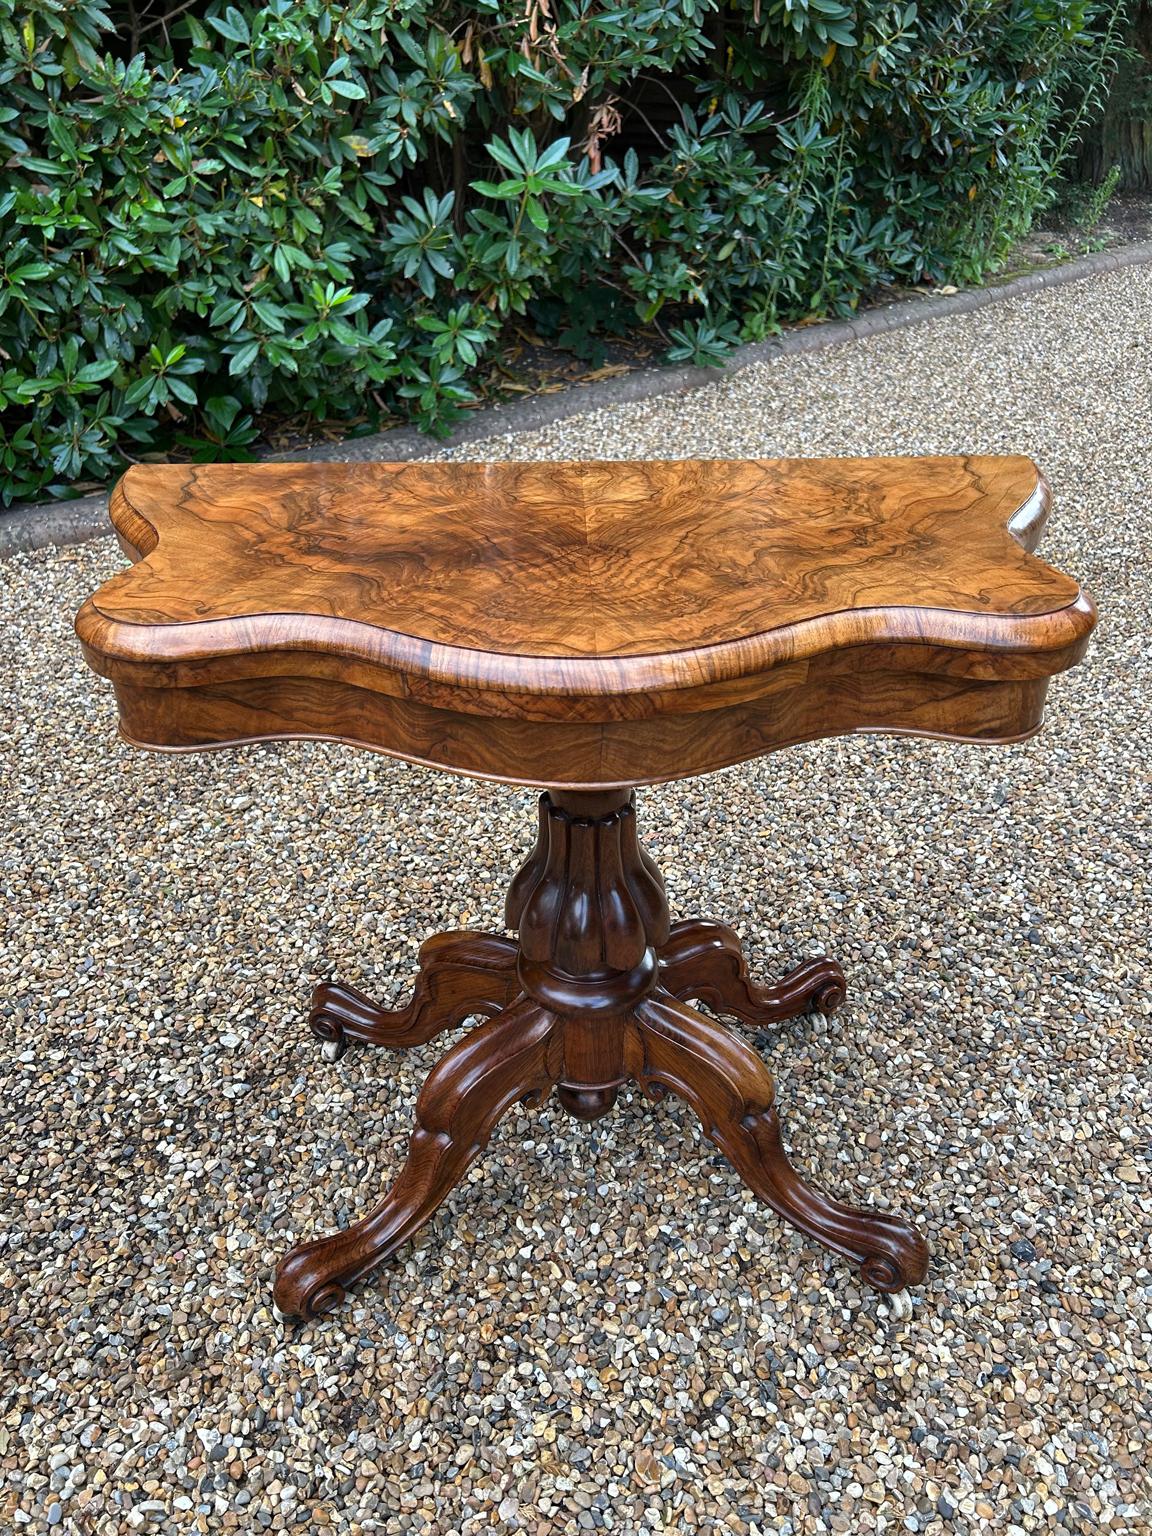 A very high quality 19th Century Victorian Burr Walnut Serpentine Card Table of exceptional quality and condition. With turned and carved column supports, four well carved and shaped cabriole legs with original castors. The top rotates by 90 degrees